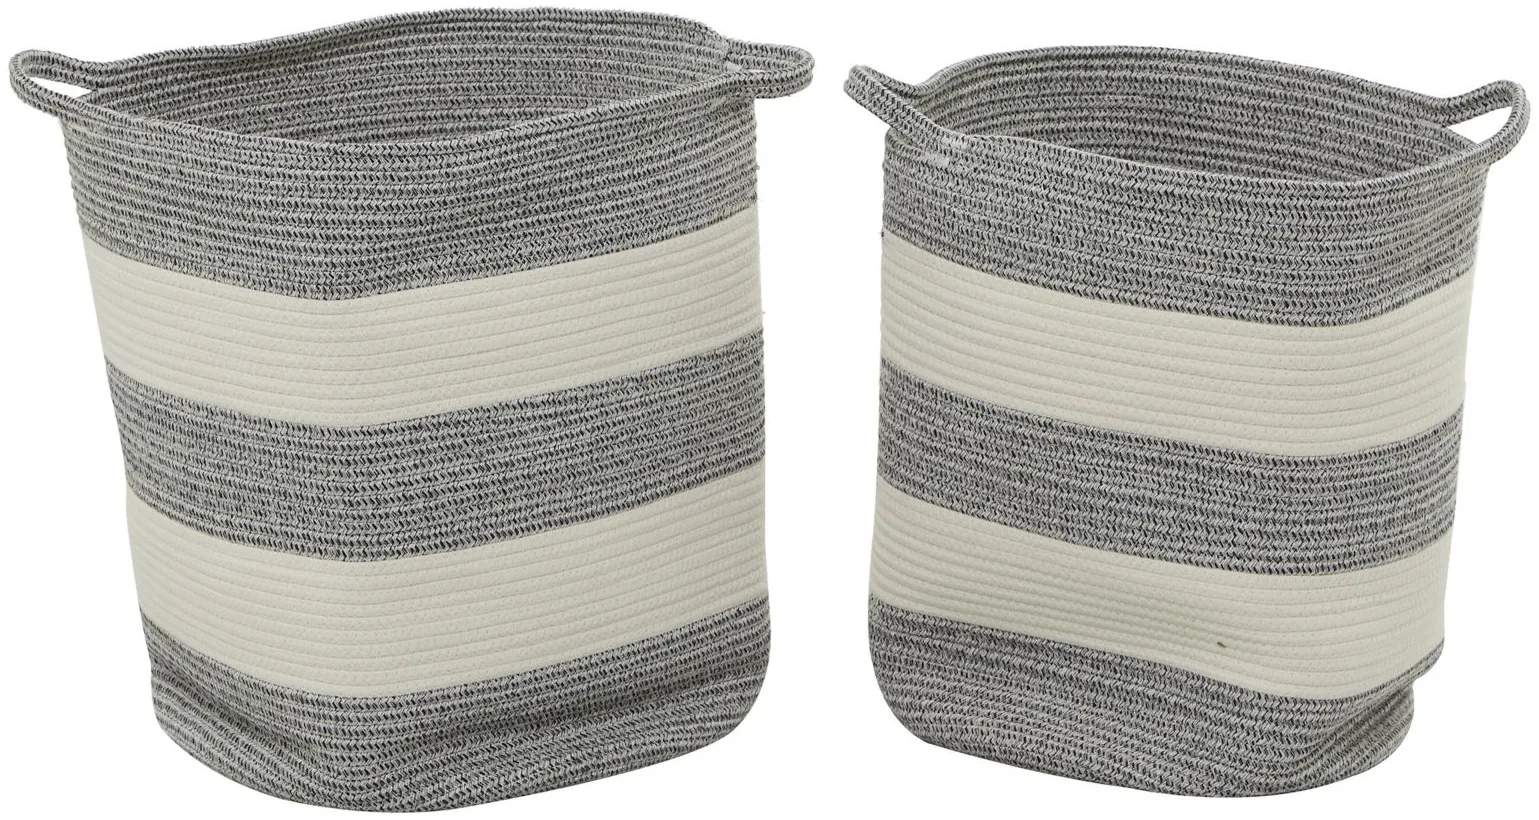 Ivy Collection Striped Storage Basket - Set of 2 in Gray by UMA Enterprises